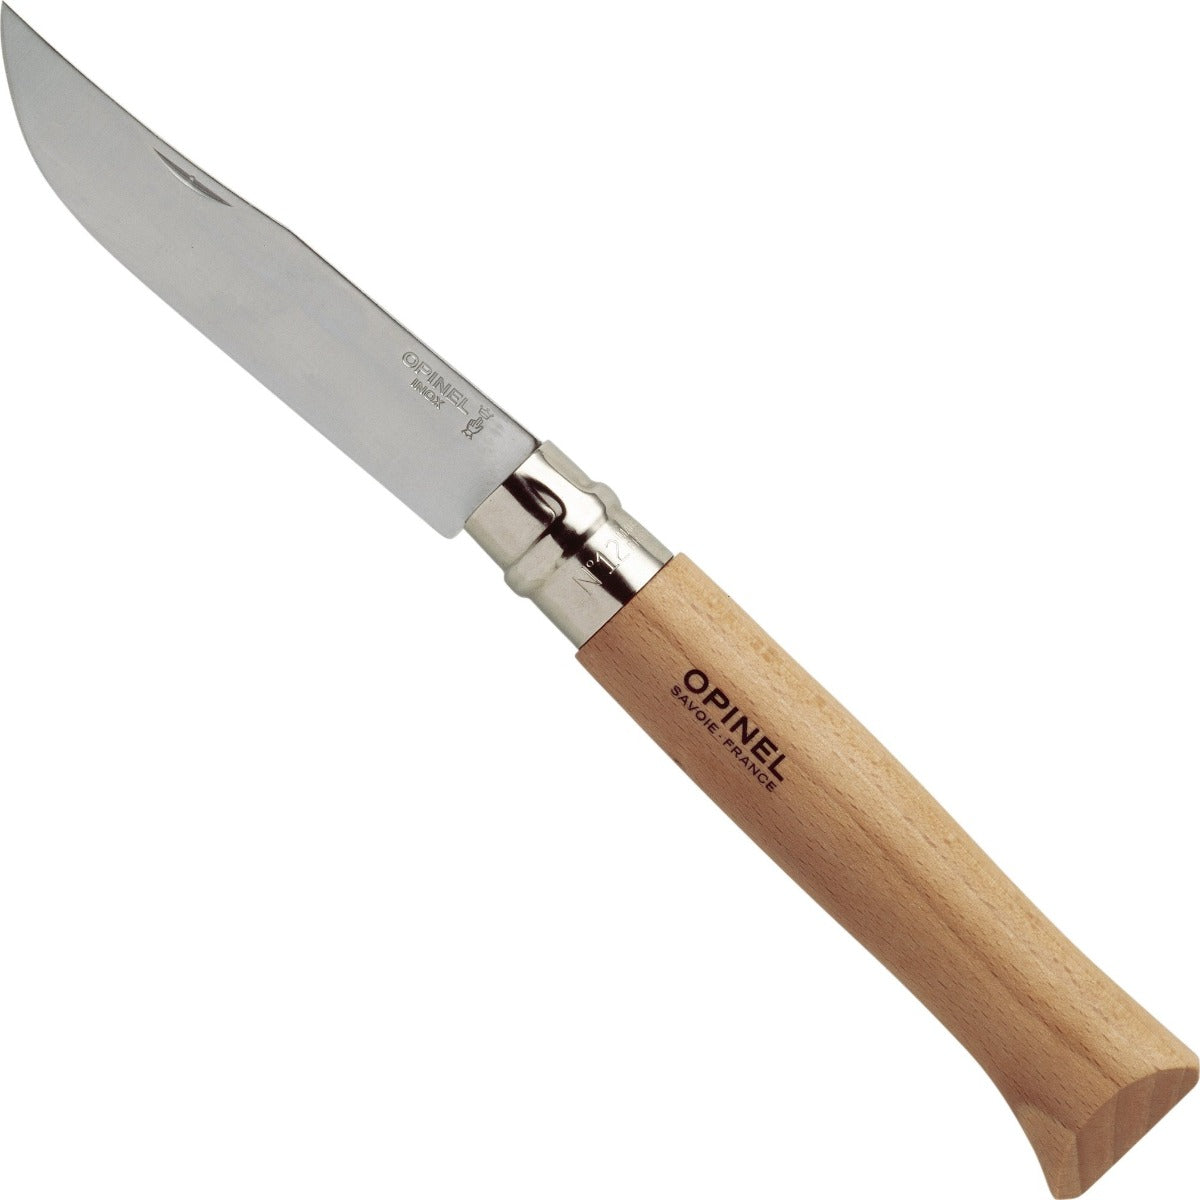 Opinel No. 12 Stainless Steel Pocket Knife